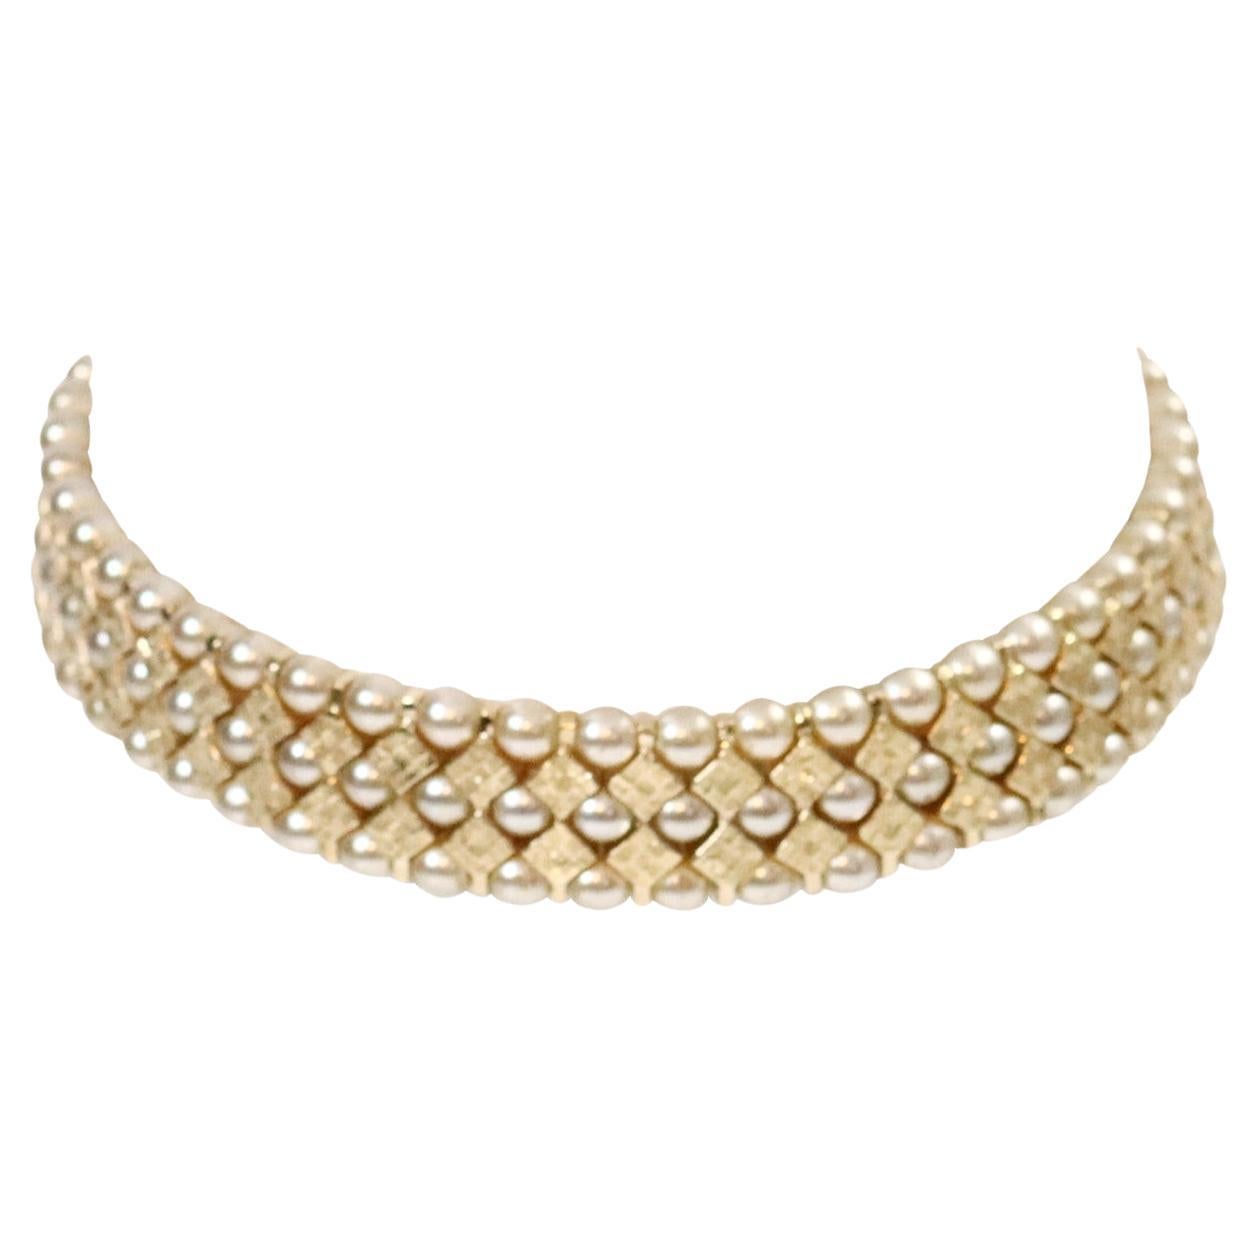 Vintage St John Gold Tone With Faux Pearls Choker circa 1990s